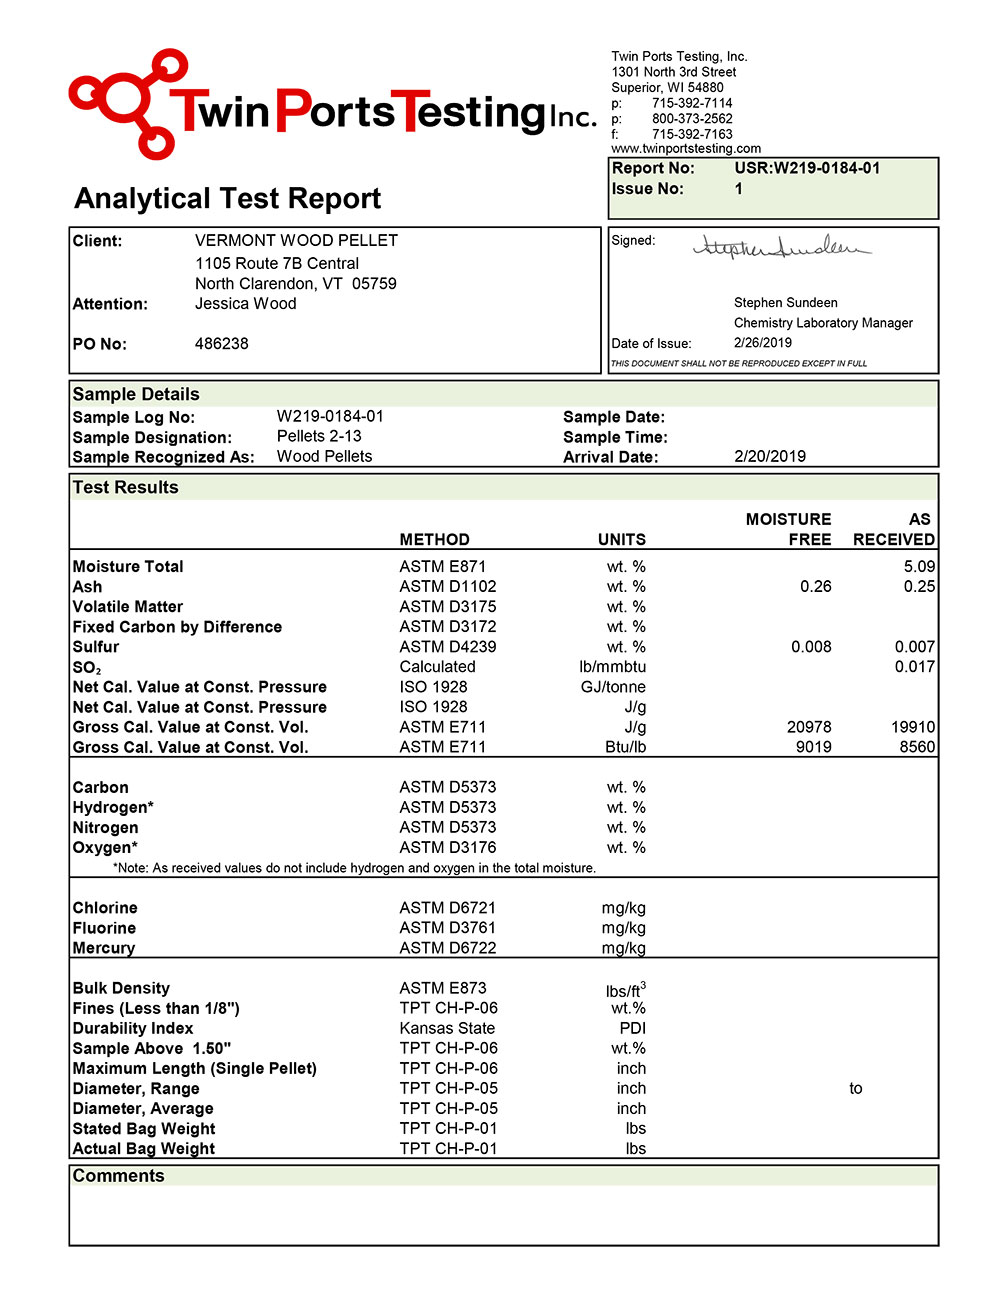 The latest test results from Vermont Wood Pellets